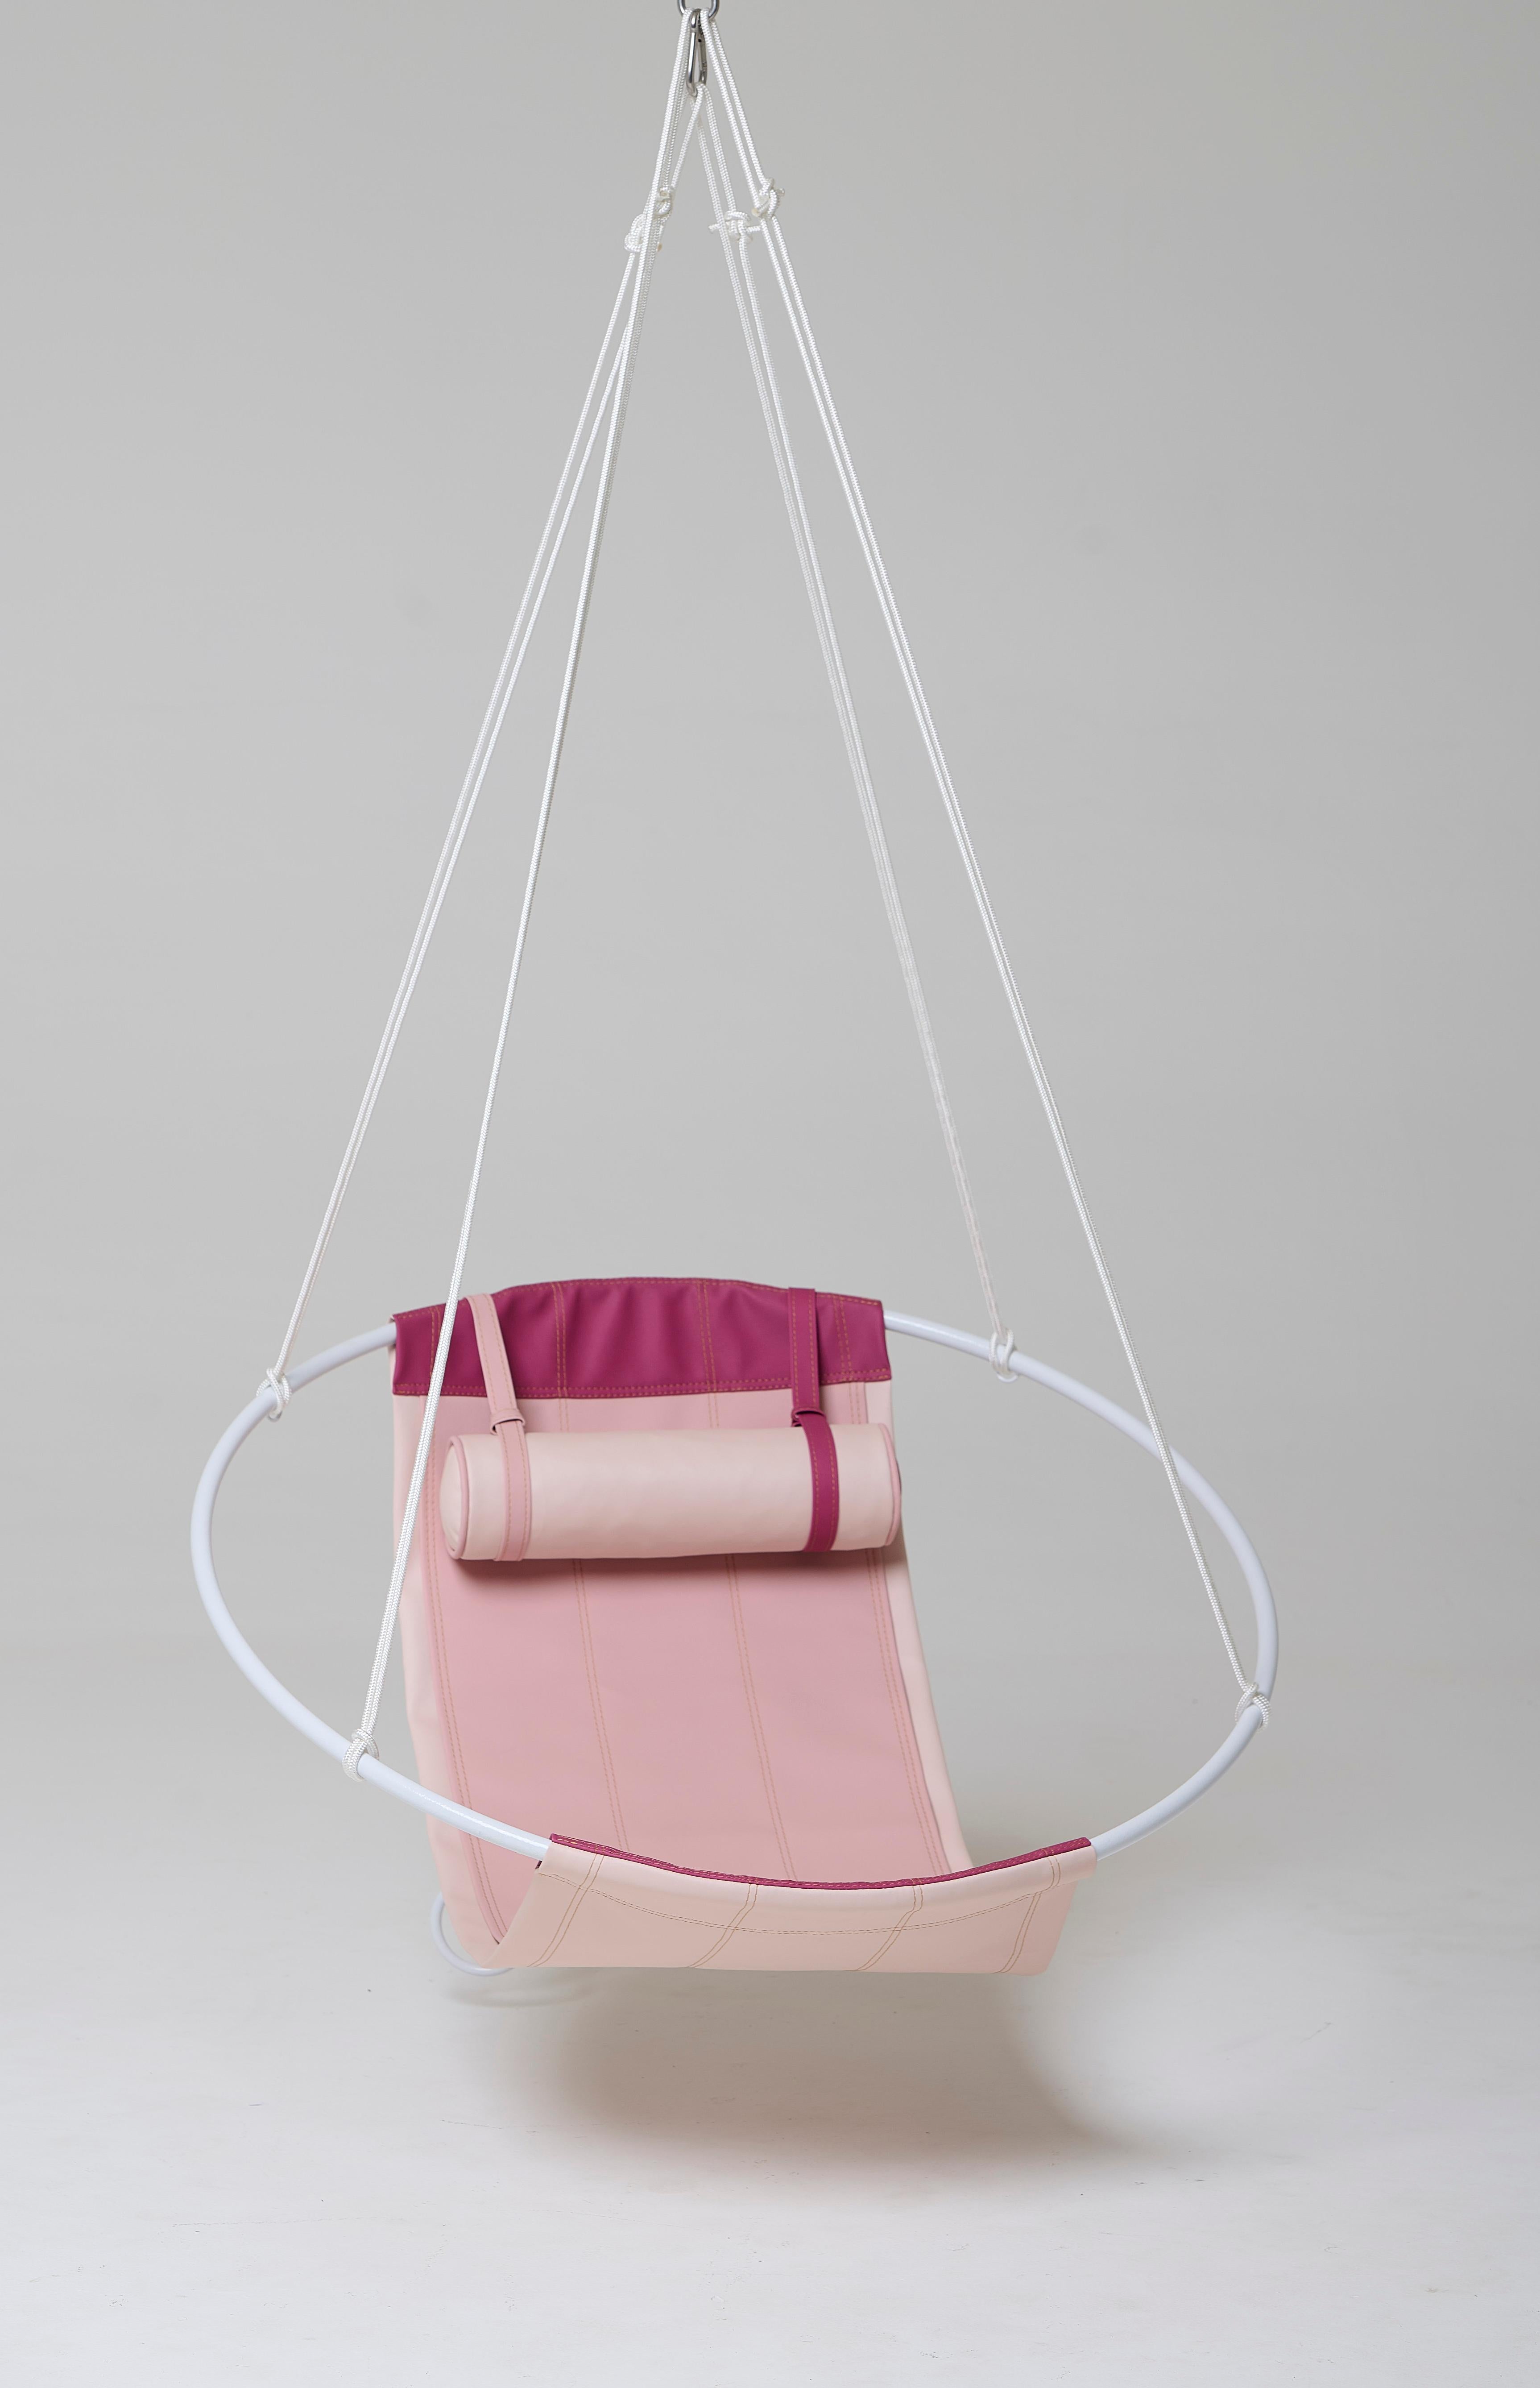 Our Outdoor Sling hanging chair swing seat is crafted with Spradling Silvertex material – a highly sustainable environmentally-friendly vegan material.

The Slings can be ordered as a single but also works together as a pair which is slightly